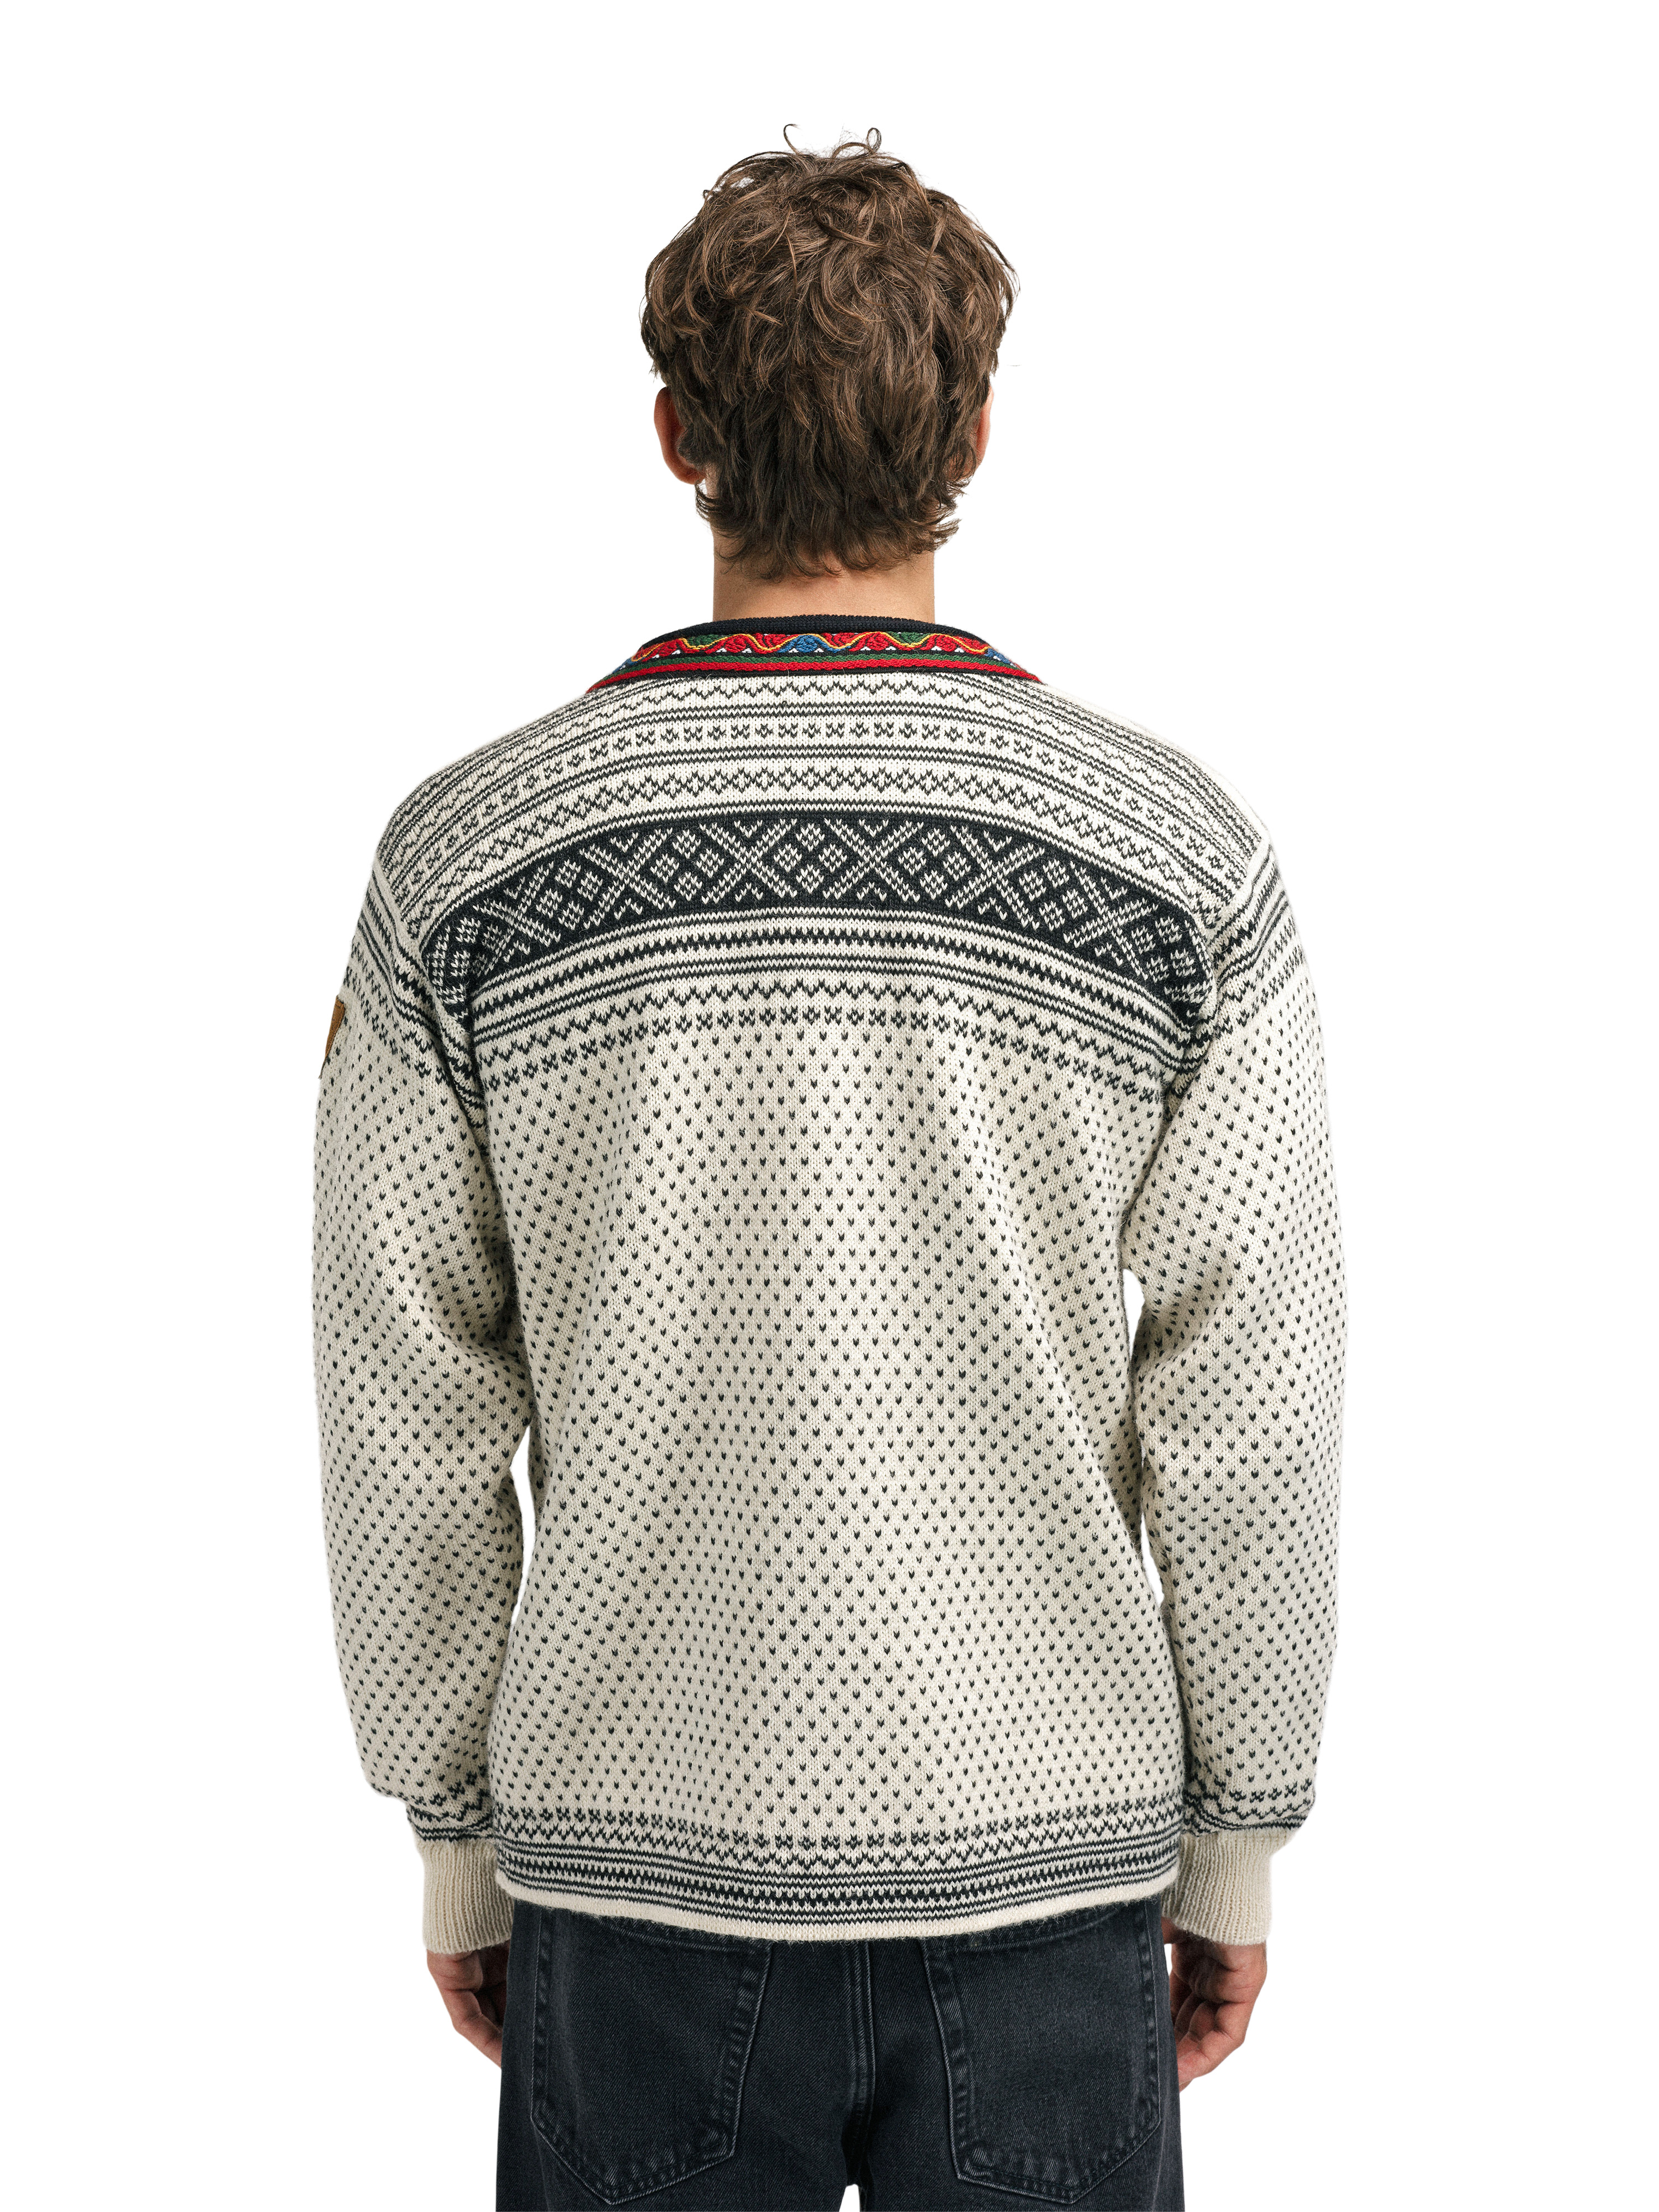 Setesdal Sweater - Unisex - Offwhite/Black - Dale of Norway - Dale